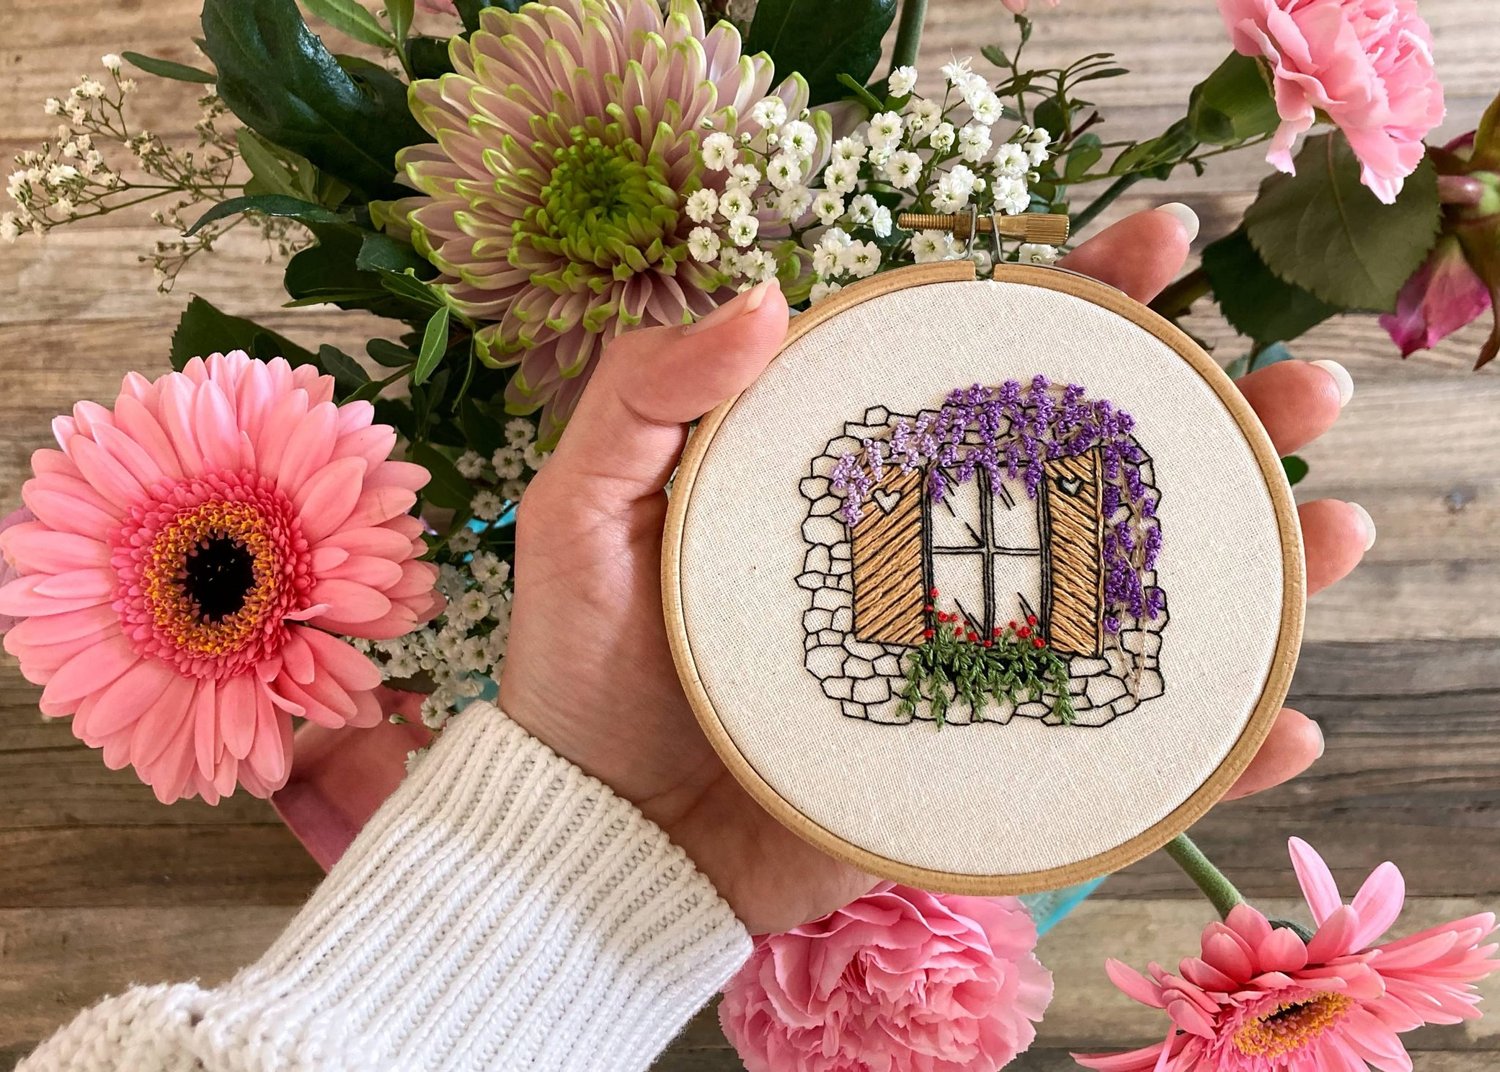 Books & Plants Embroidery Design - Free Pattern 